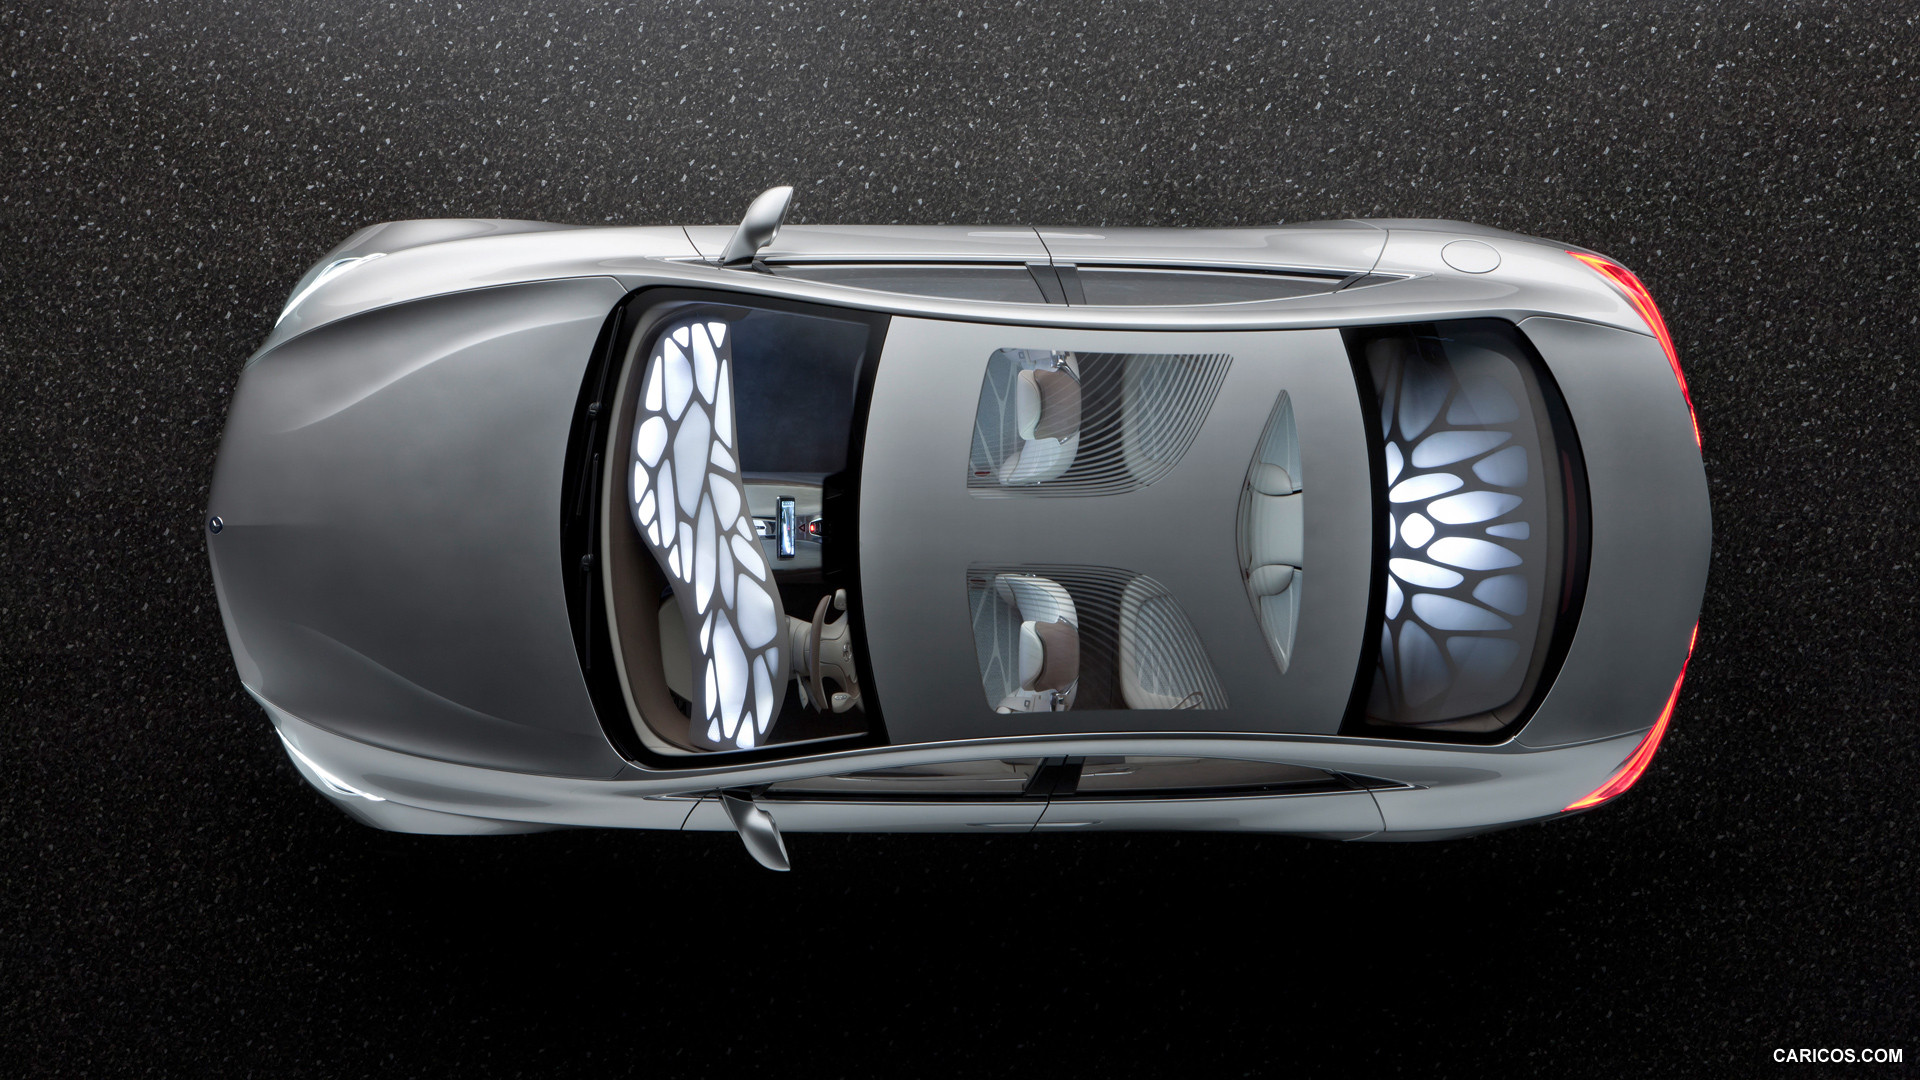 Mercedes-Benz F800 Style Concept (2010)  - Top, #67 of 120